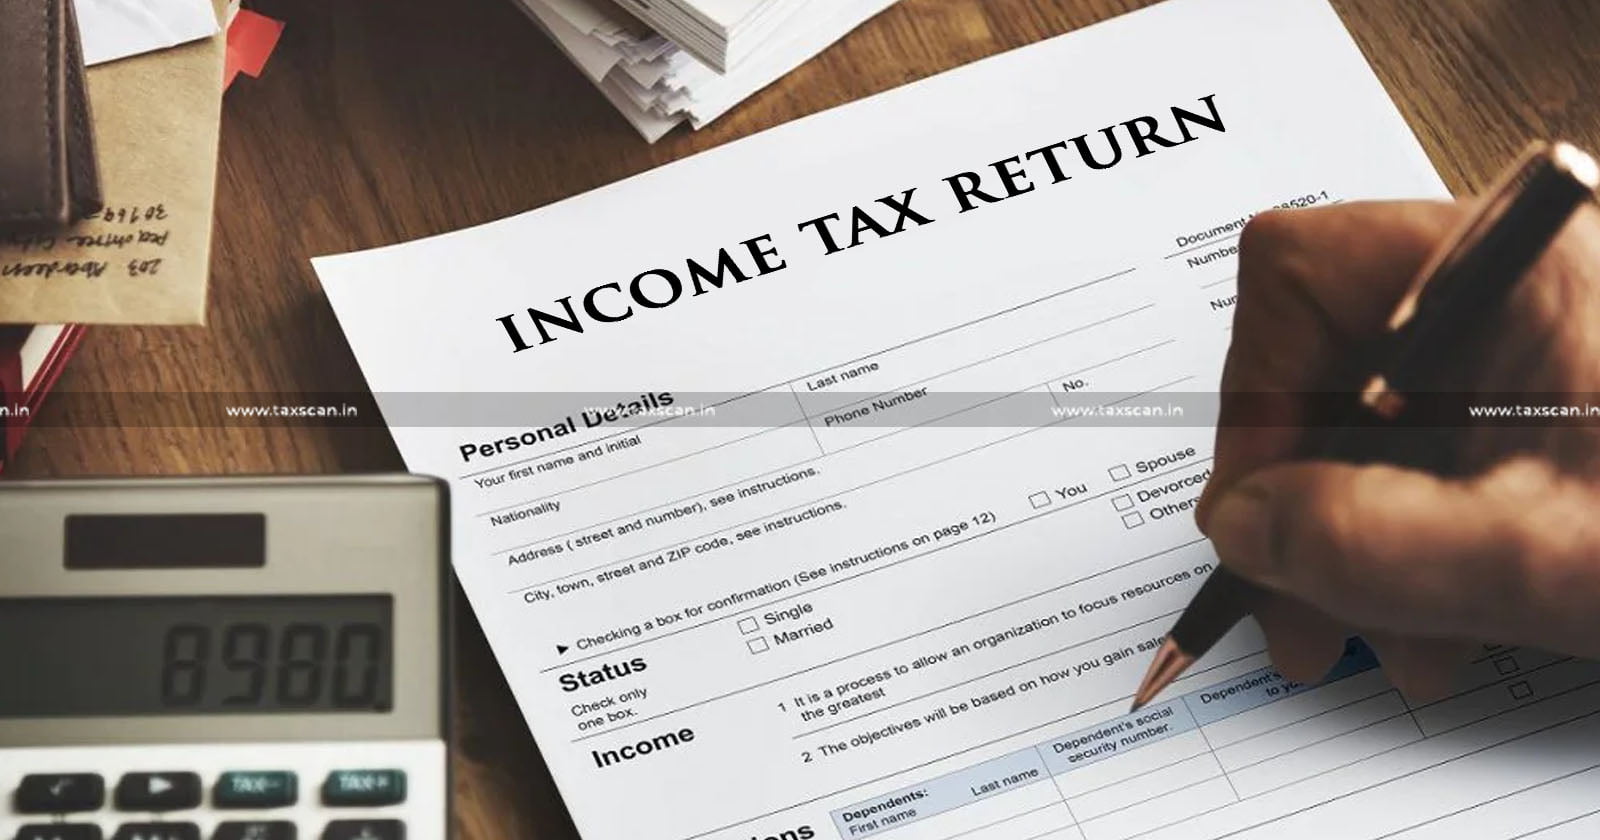 Income Tax Return - Income Tax Return Filing - Taxpayers - ITR - Notices - TAXSCAN